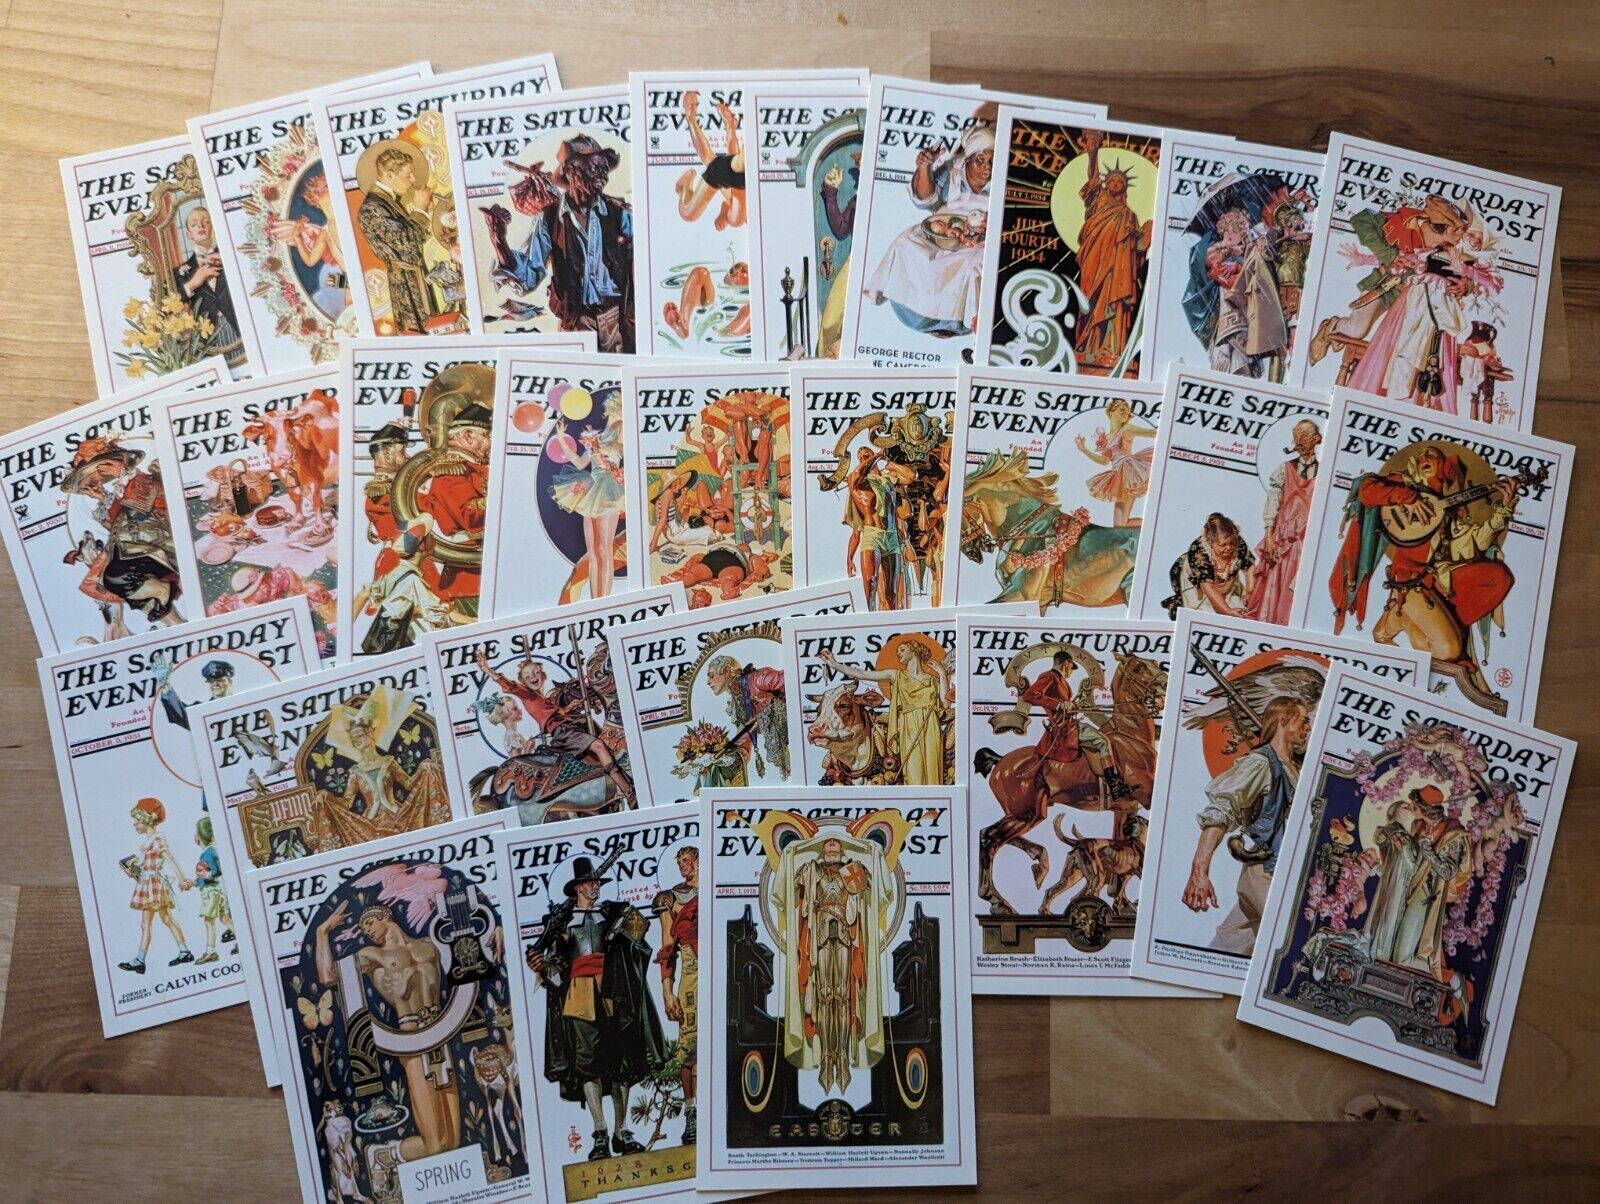 THE SATURDAY EVENING POST 1995 J.C. LEYENDECKER NORMAN ROCKWELL TRADING CARDS